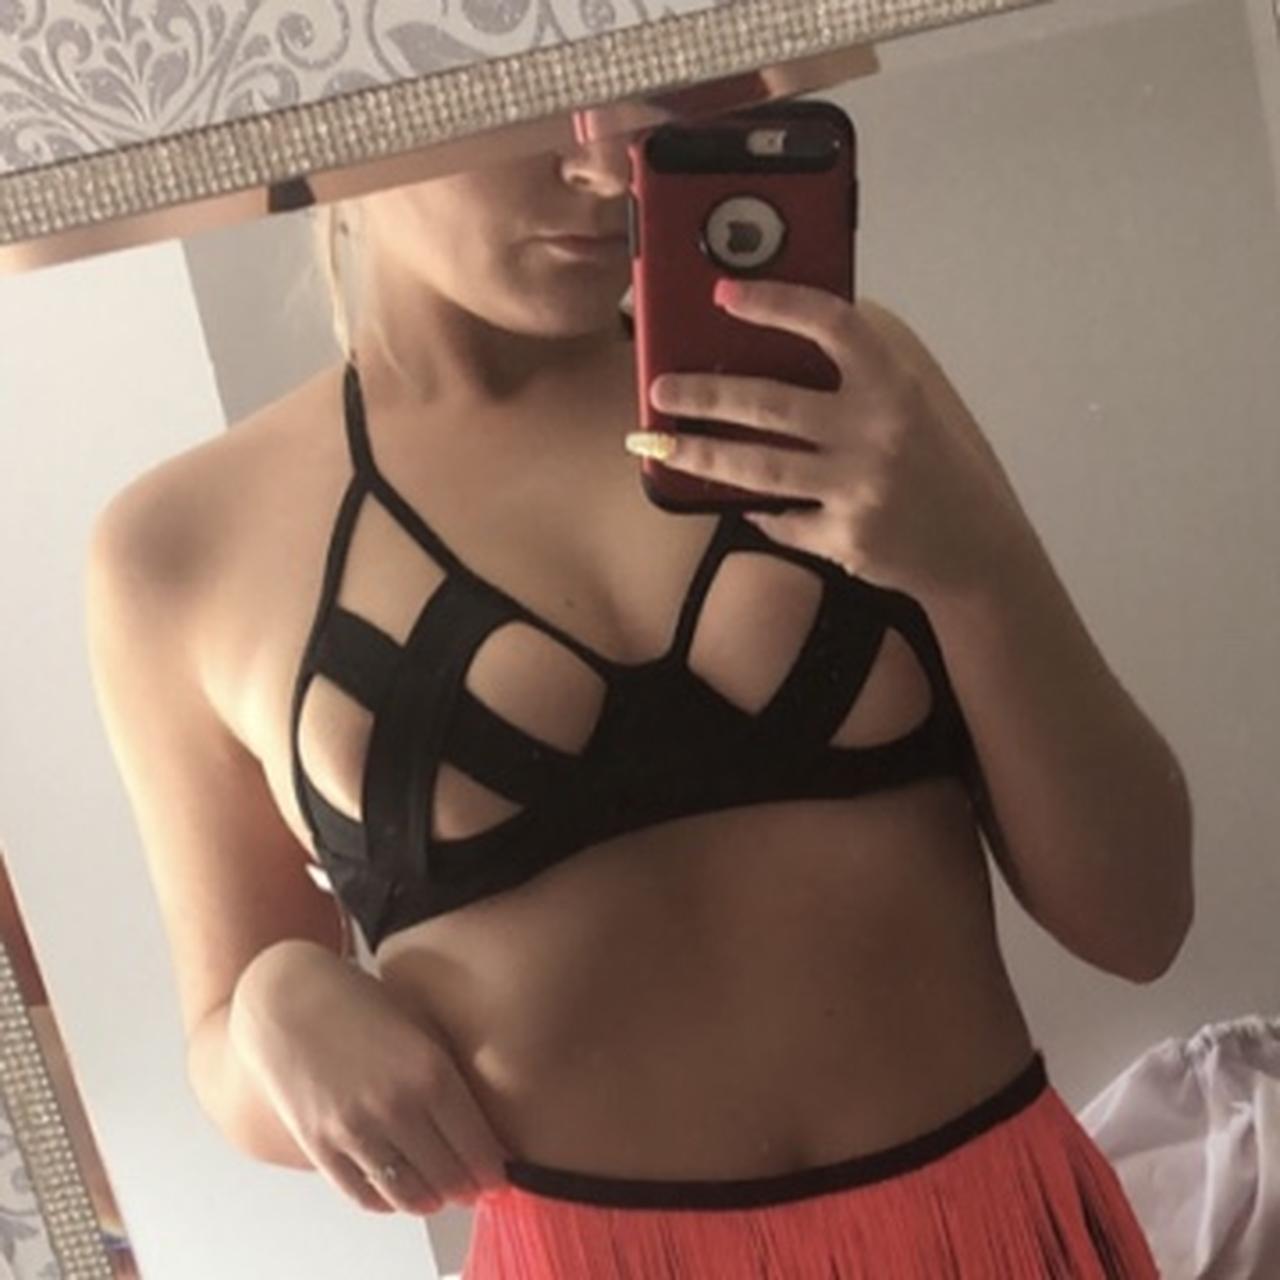 My boobs are a 34C/32D and this fitted me absolute